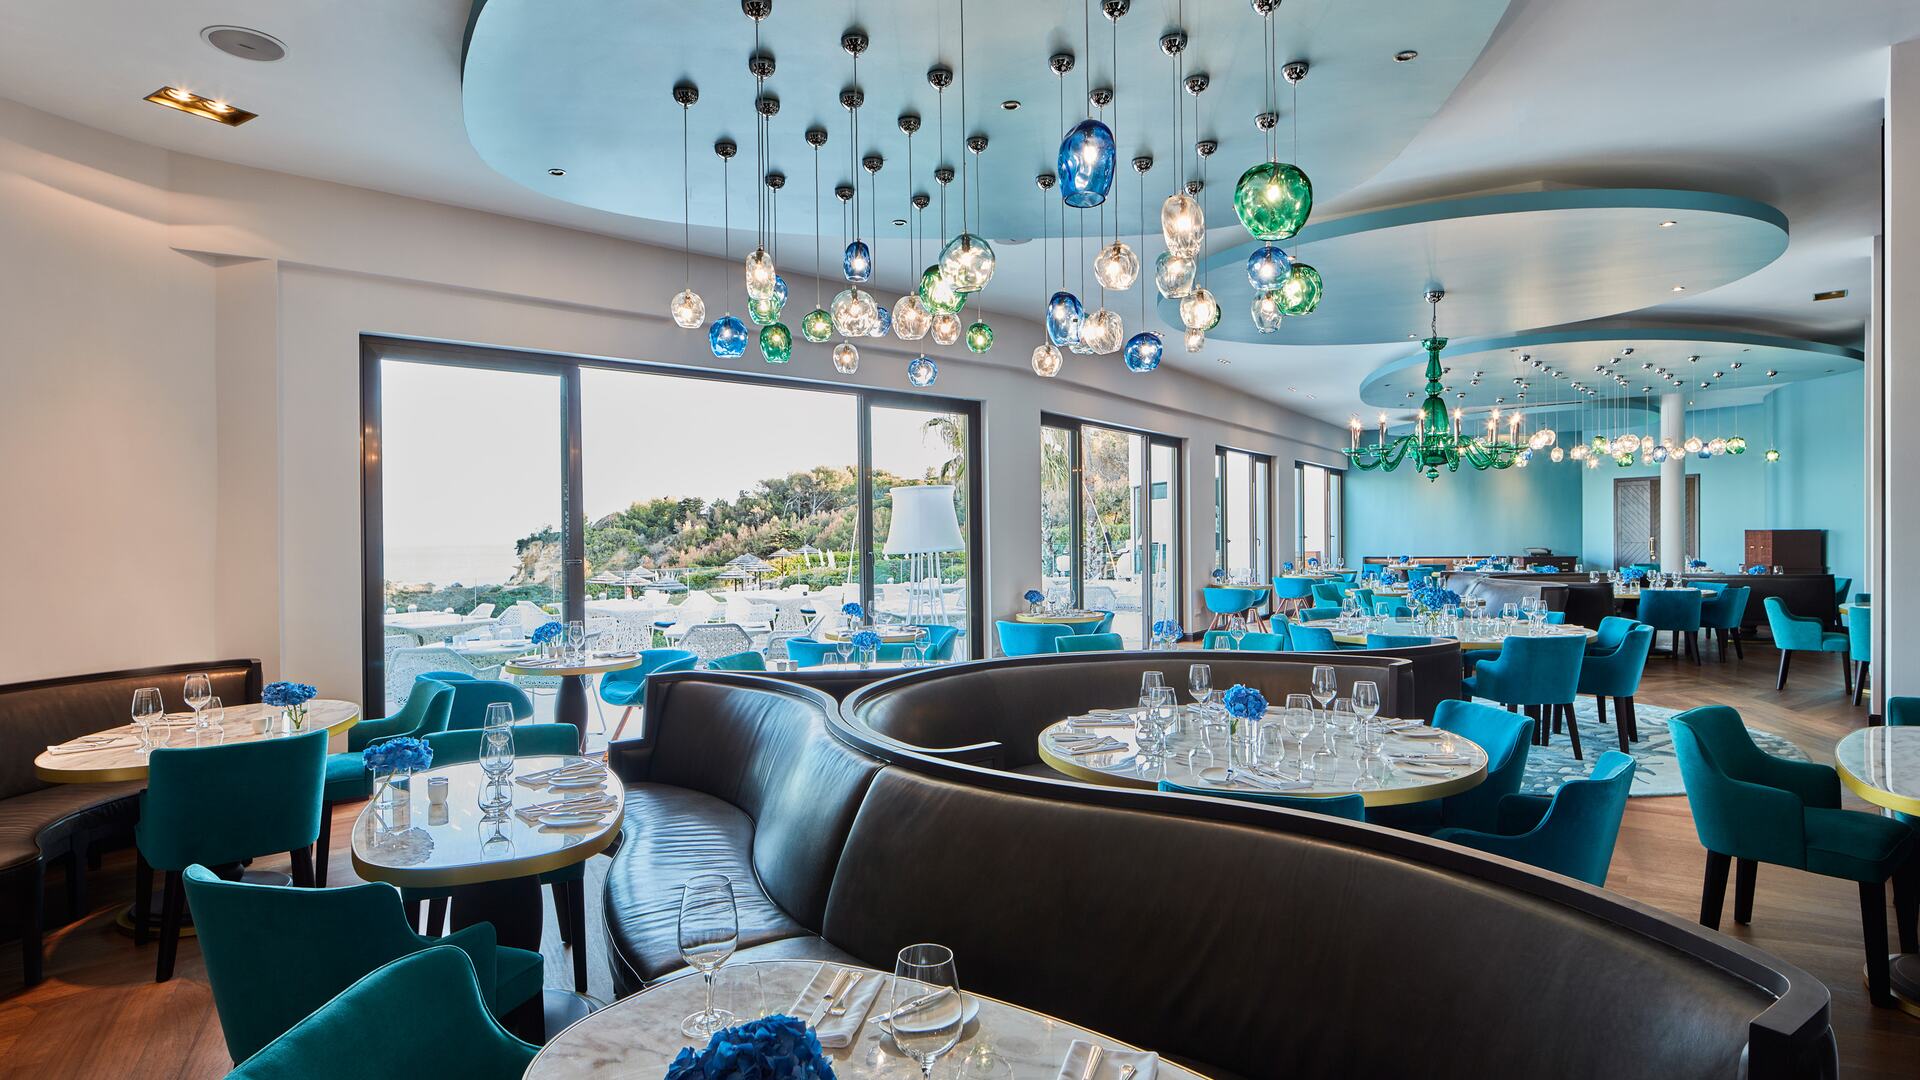 An elegant and sophisticated interior design in shades of blue that makes it seem like the Ocean extends itself into the restaurant.